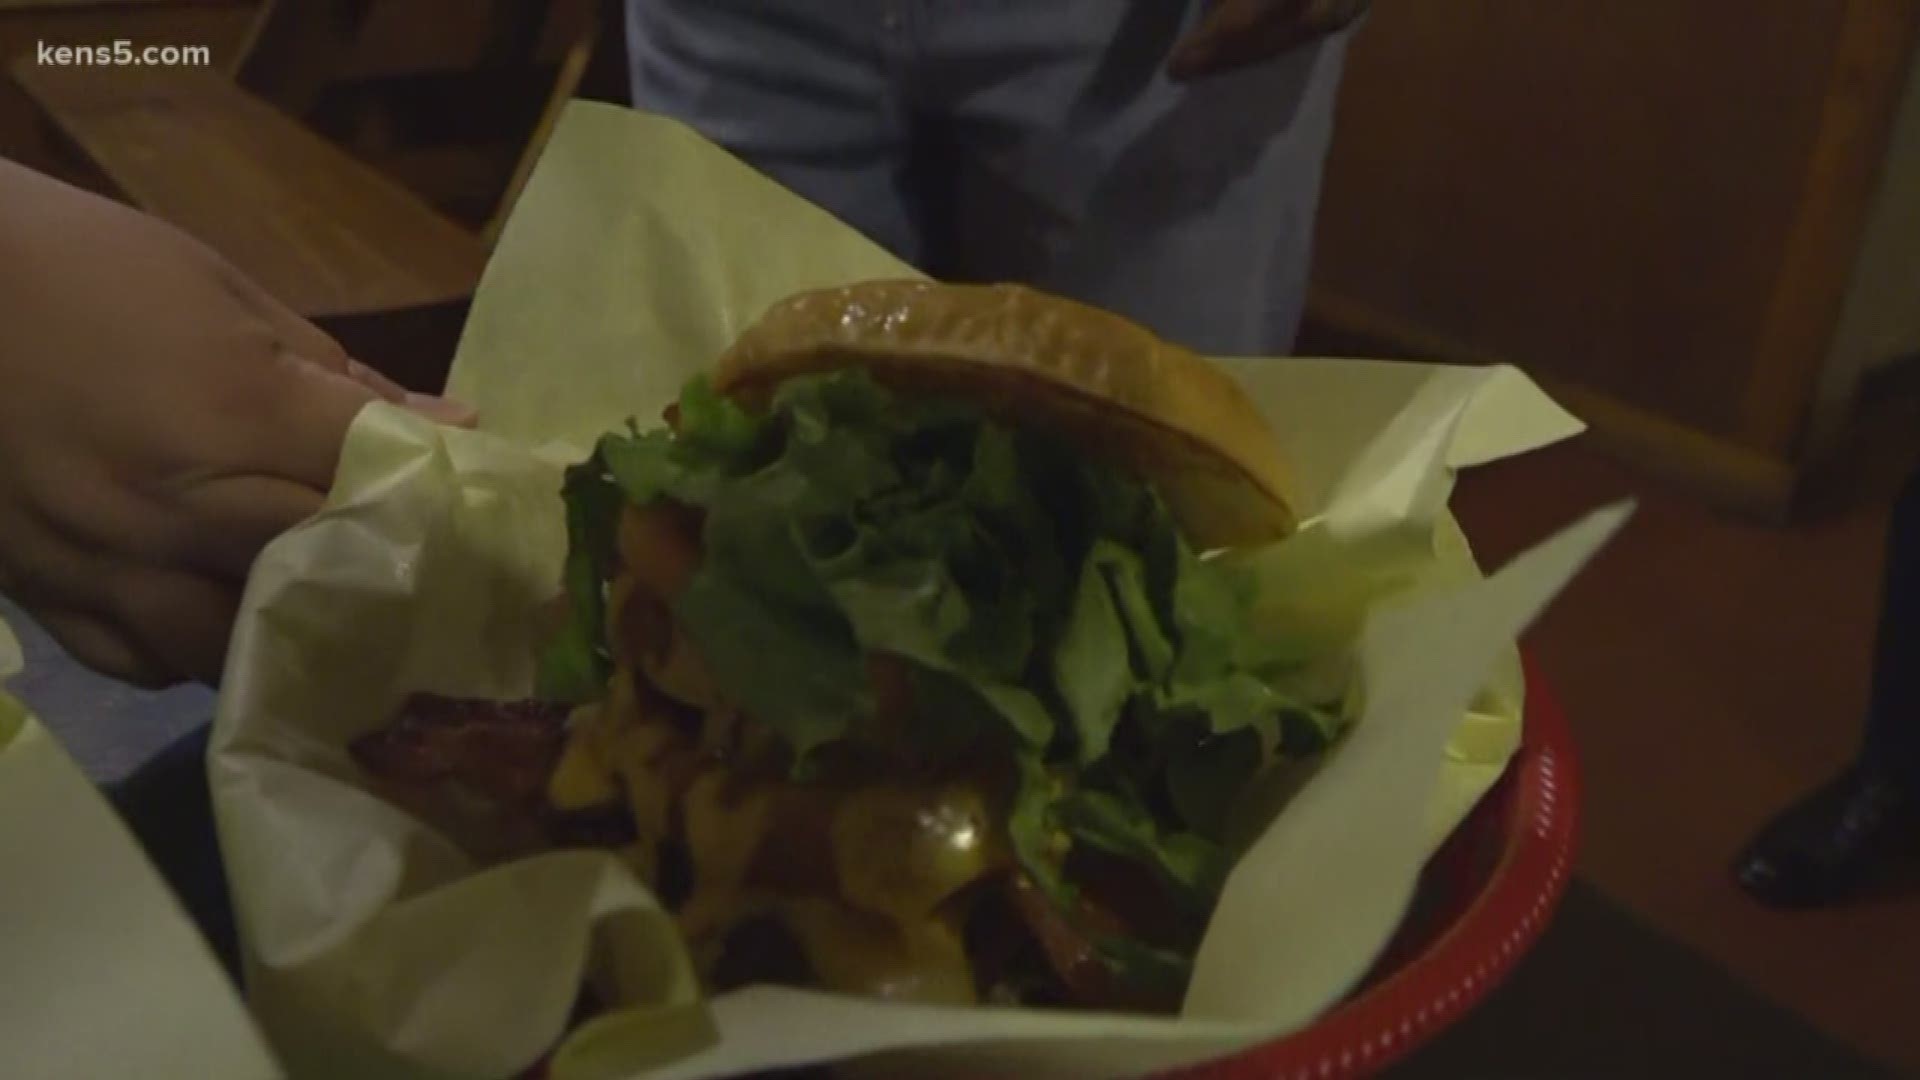 32 burgers, 10 days, one big cause. Starting today, eating a burger can help the San Antonio Food Bank.